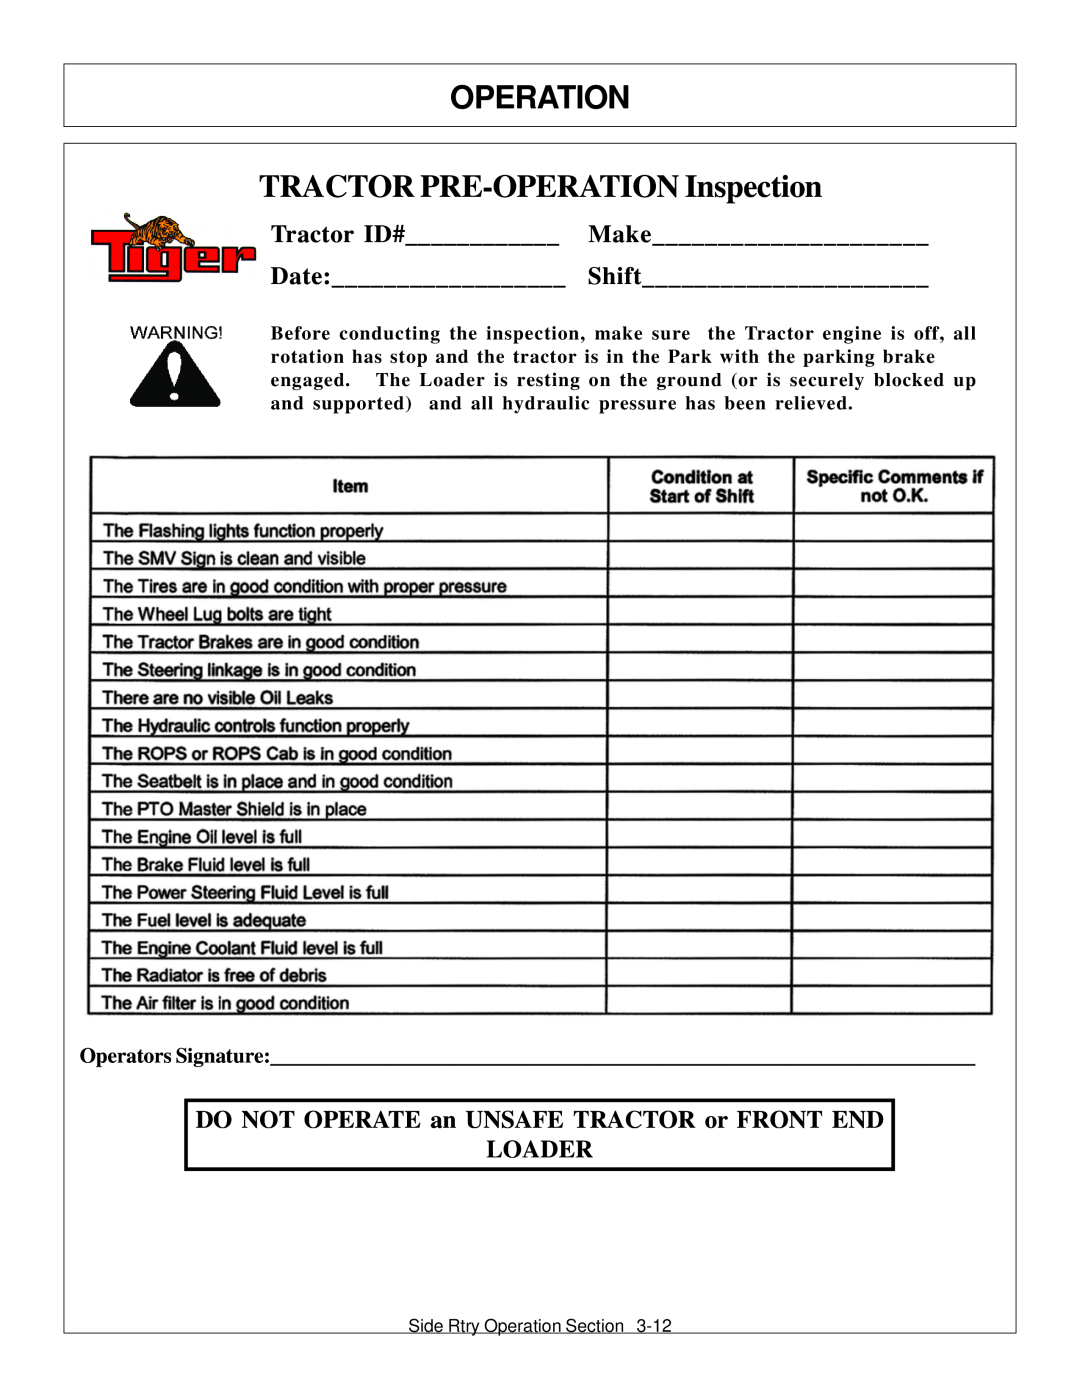 Tiger Products Co., Ltd TS 100A manual Operation, TRACTOR PRE-OPERATION Inspection, Tractor ID# Make Date Shift 